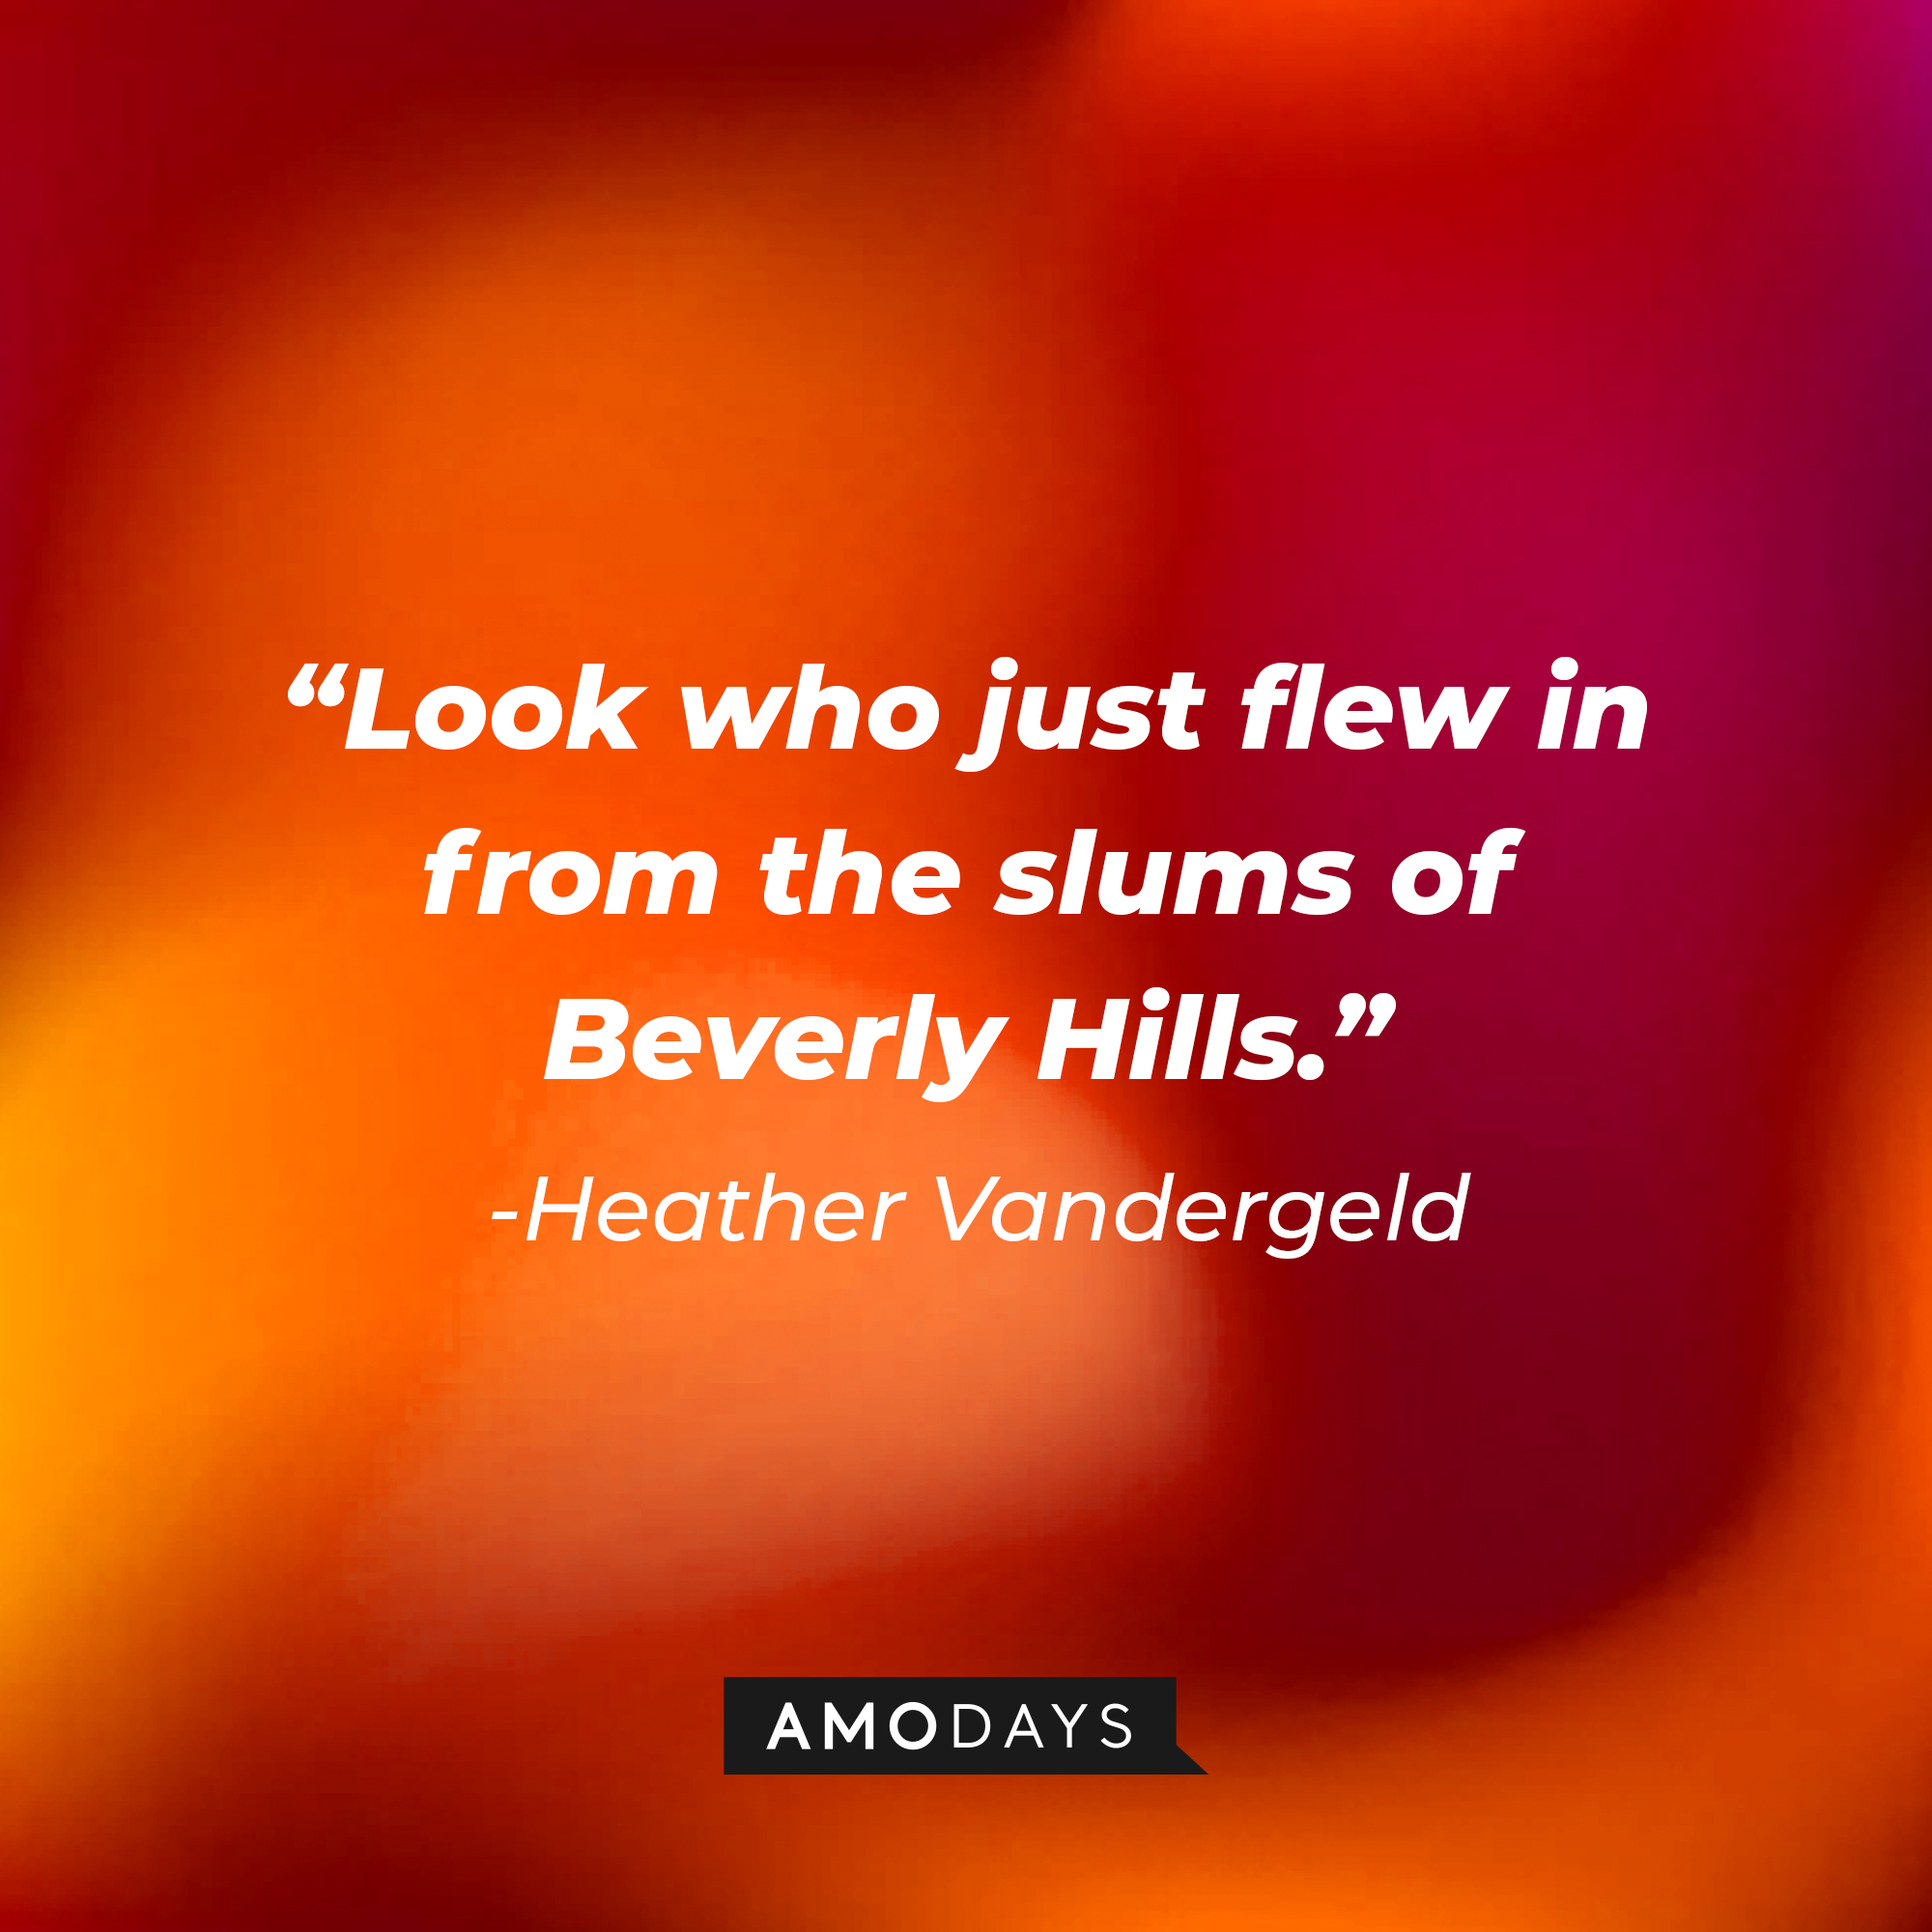 Heather Vandergeld’s quote: “Look who just flew in from the slums of Beverly Hills.”  | Source: AmoDays